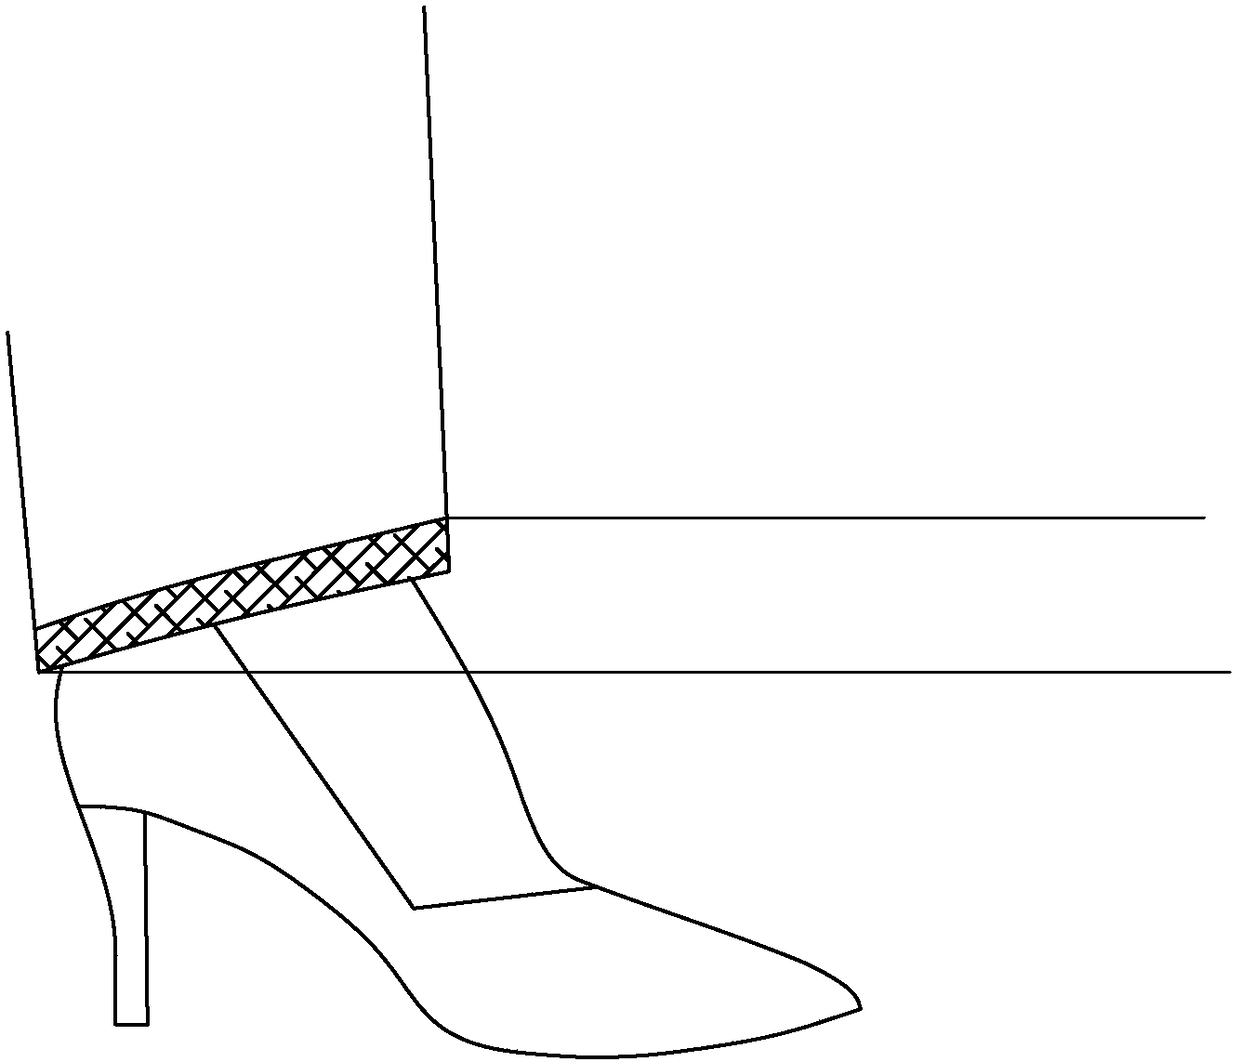 A method of making professional women's trousers with high heels